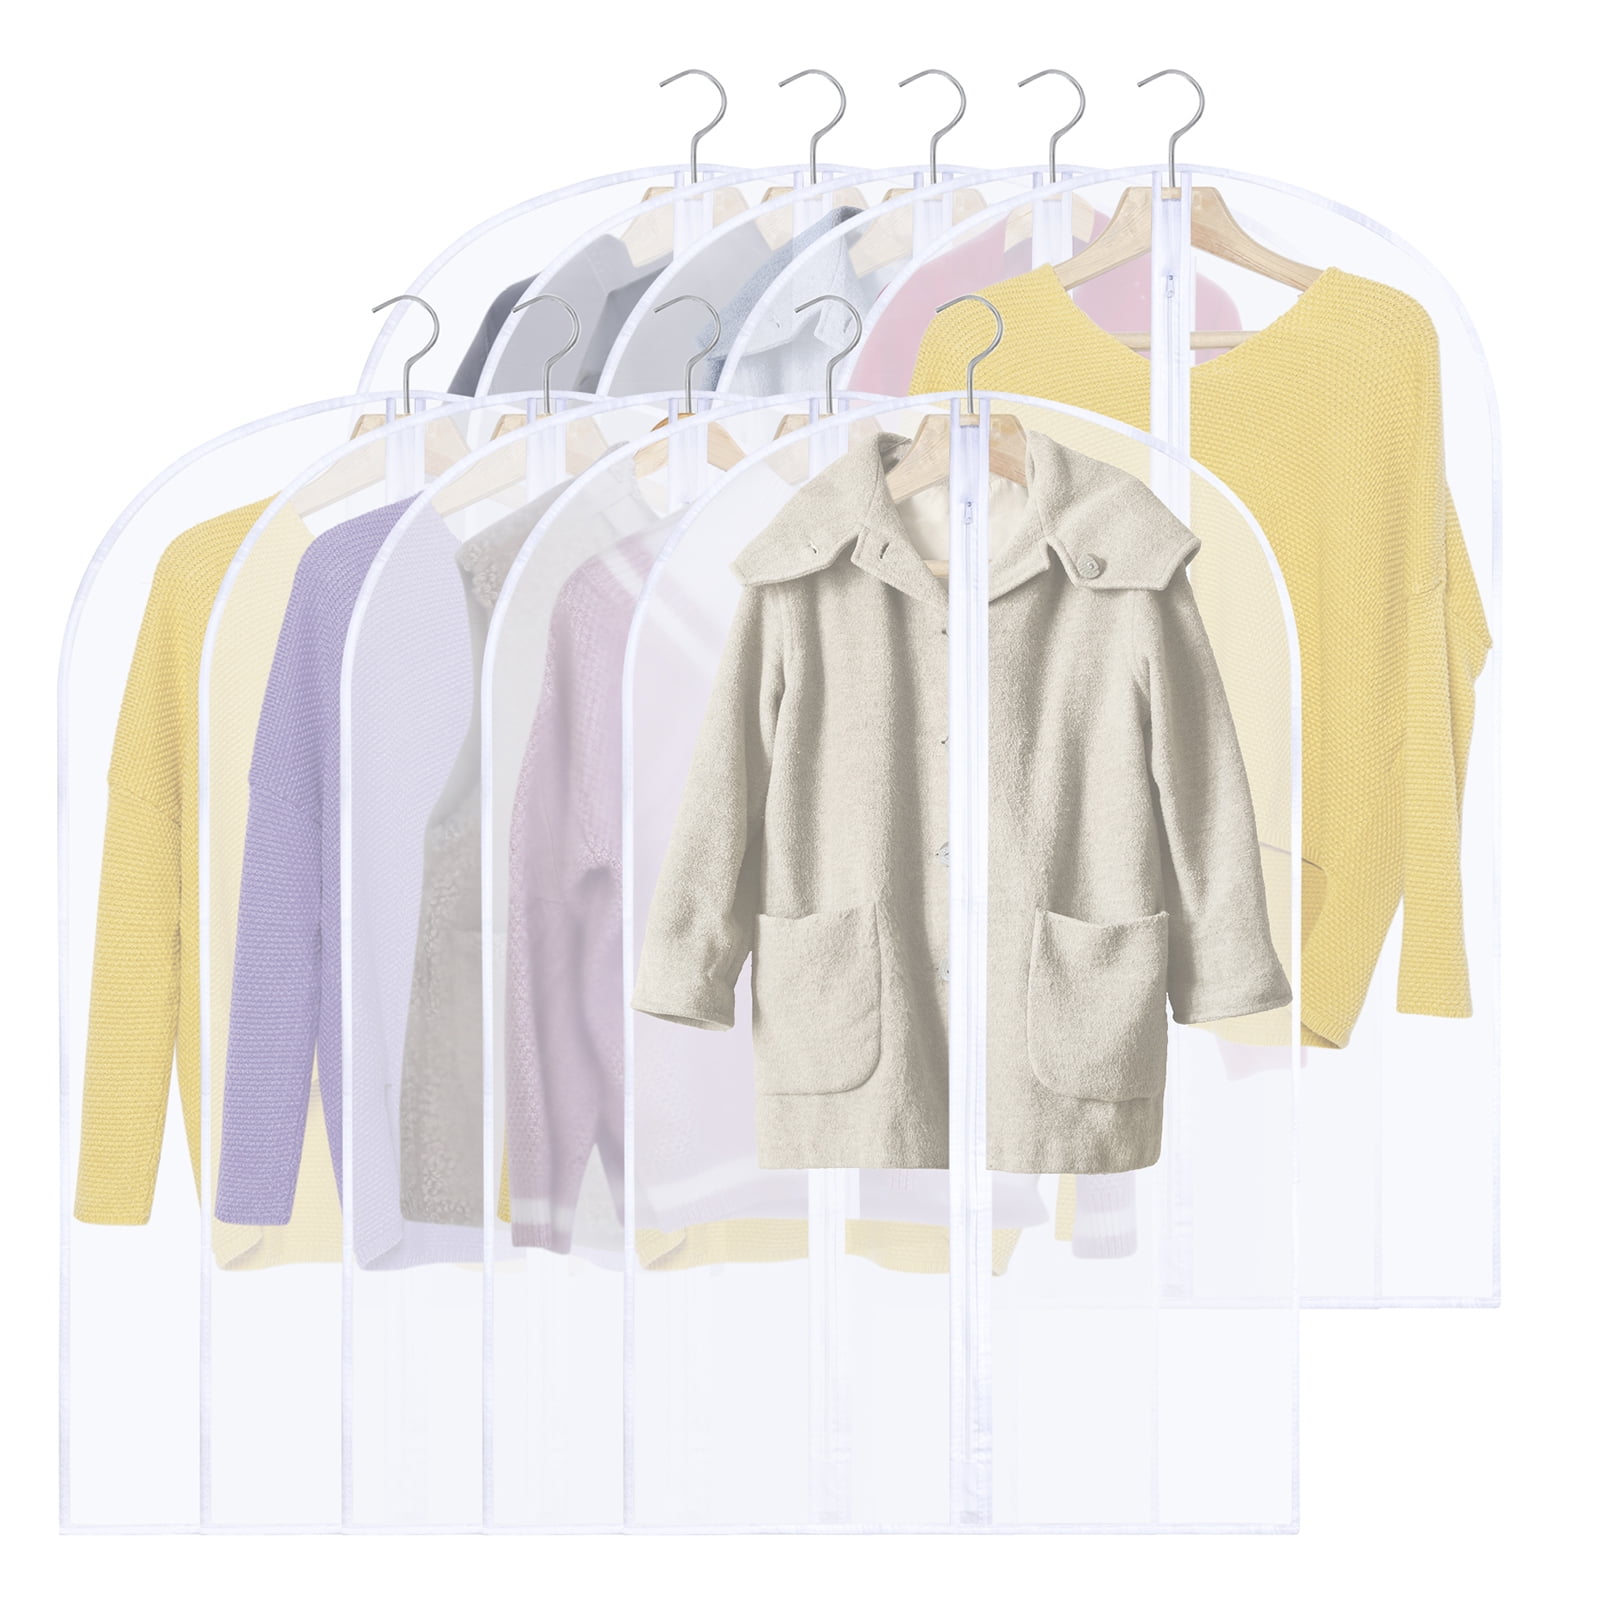 Premium Photo  Wooden hangers with clothes in dry cleaning bags closeup